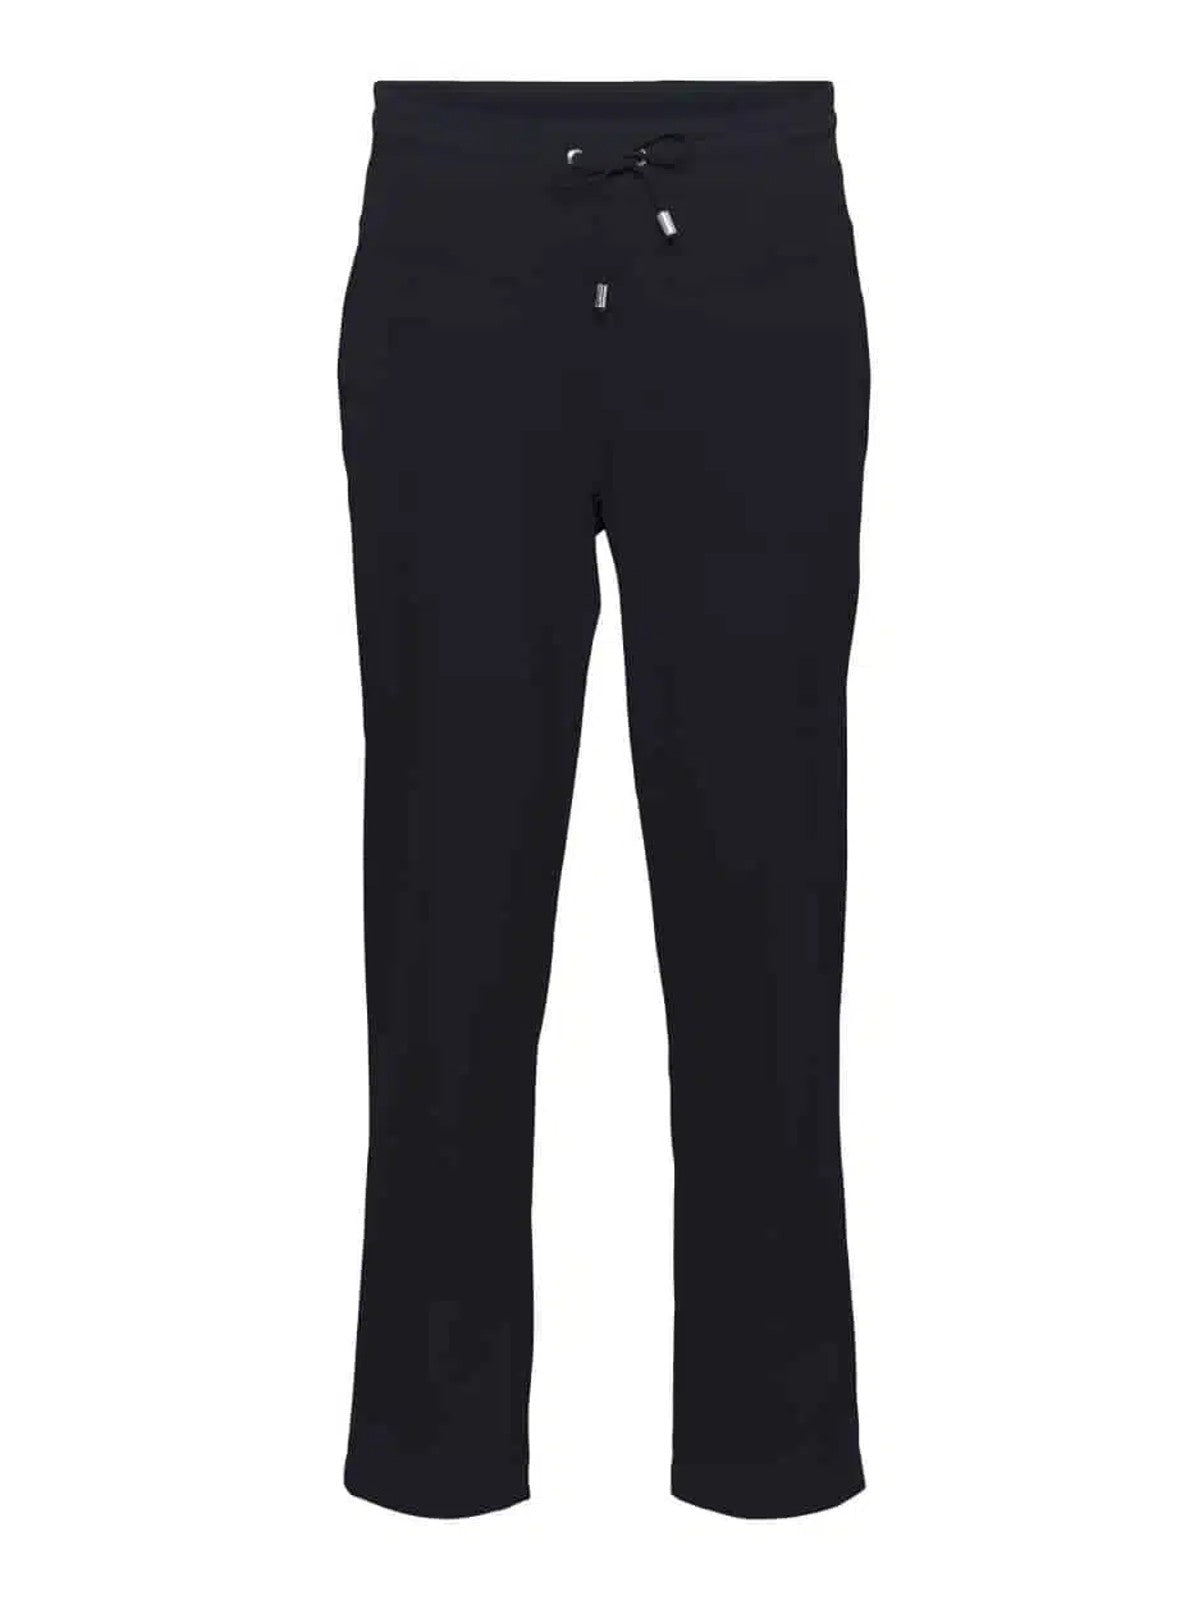 Page Navy Travel Pants